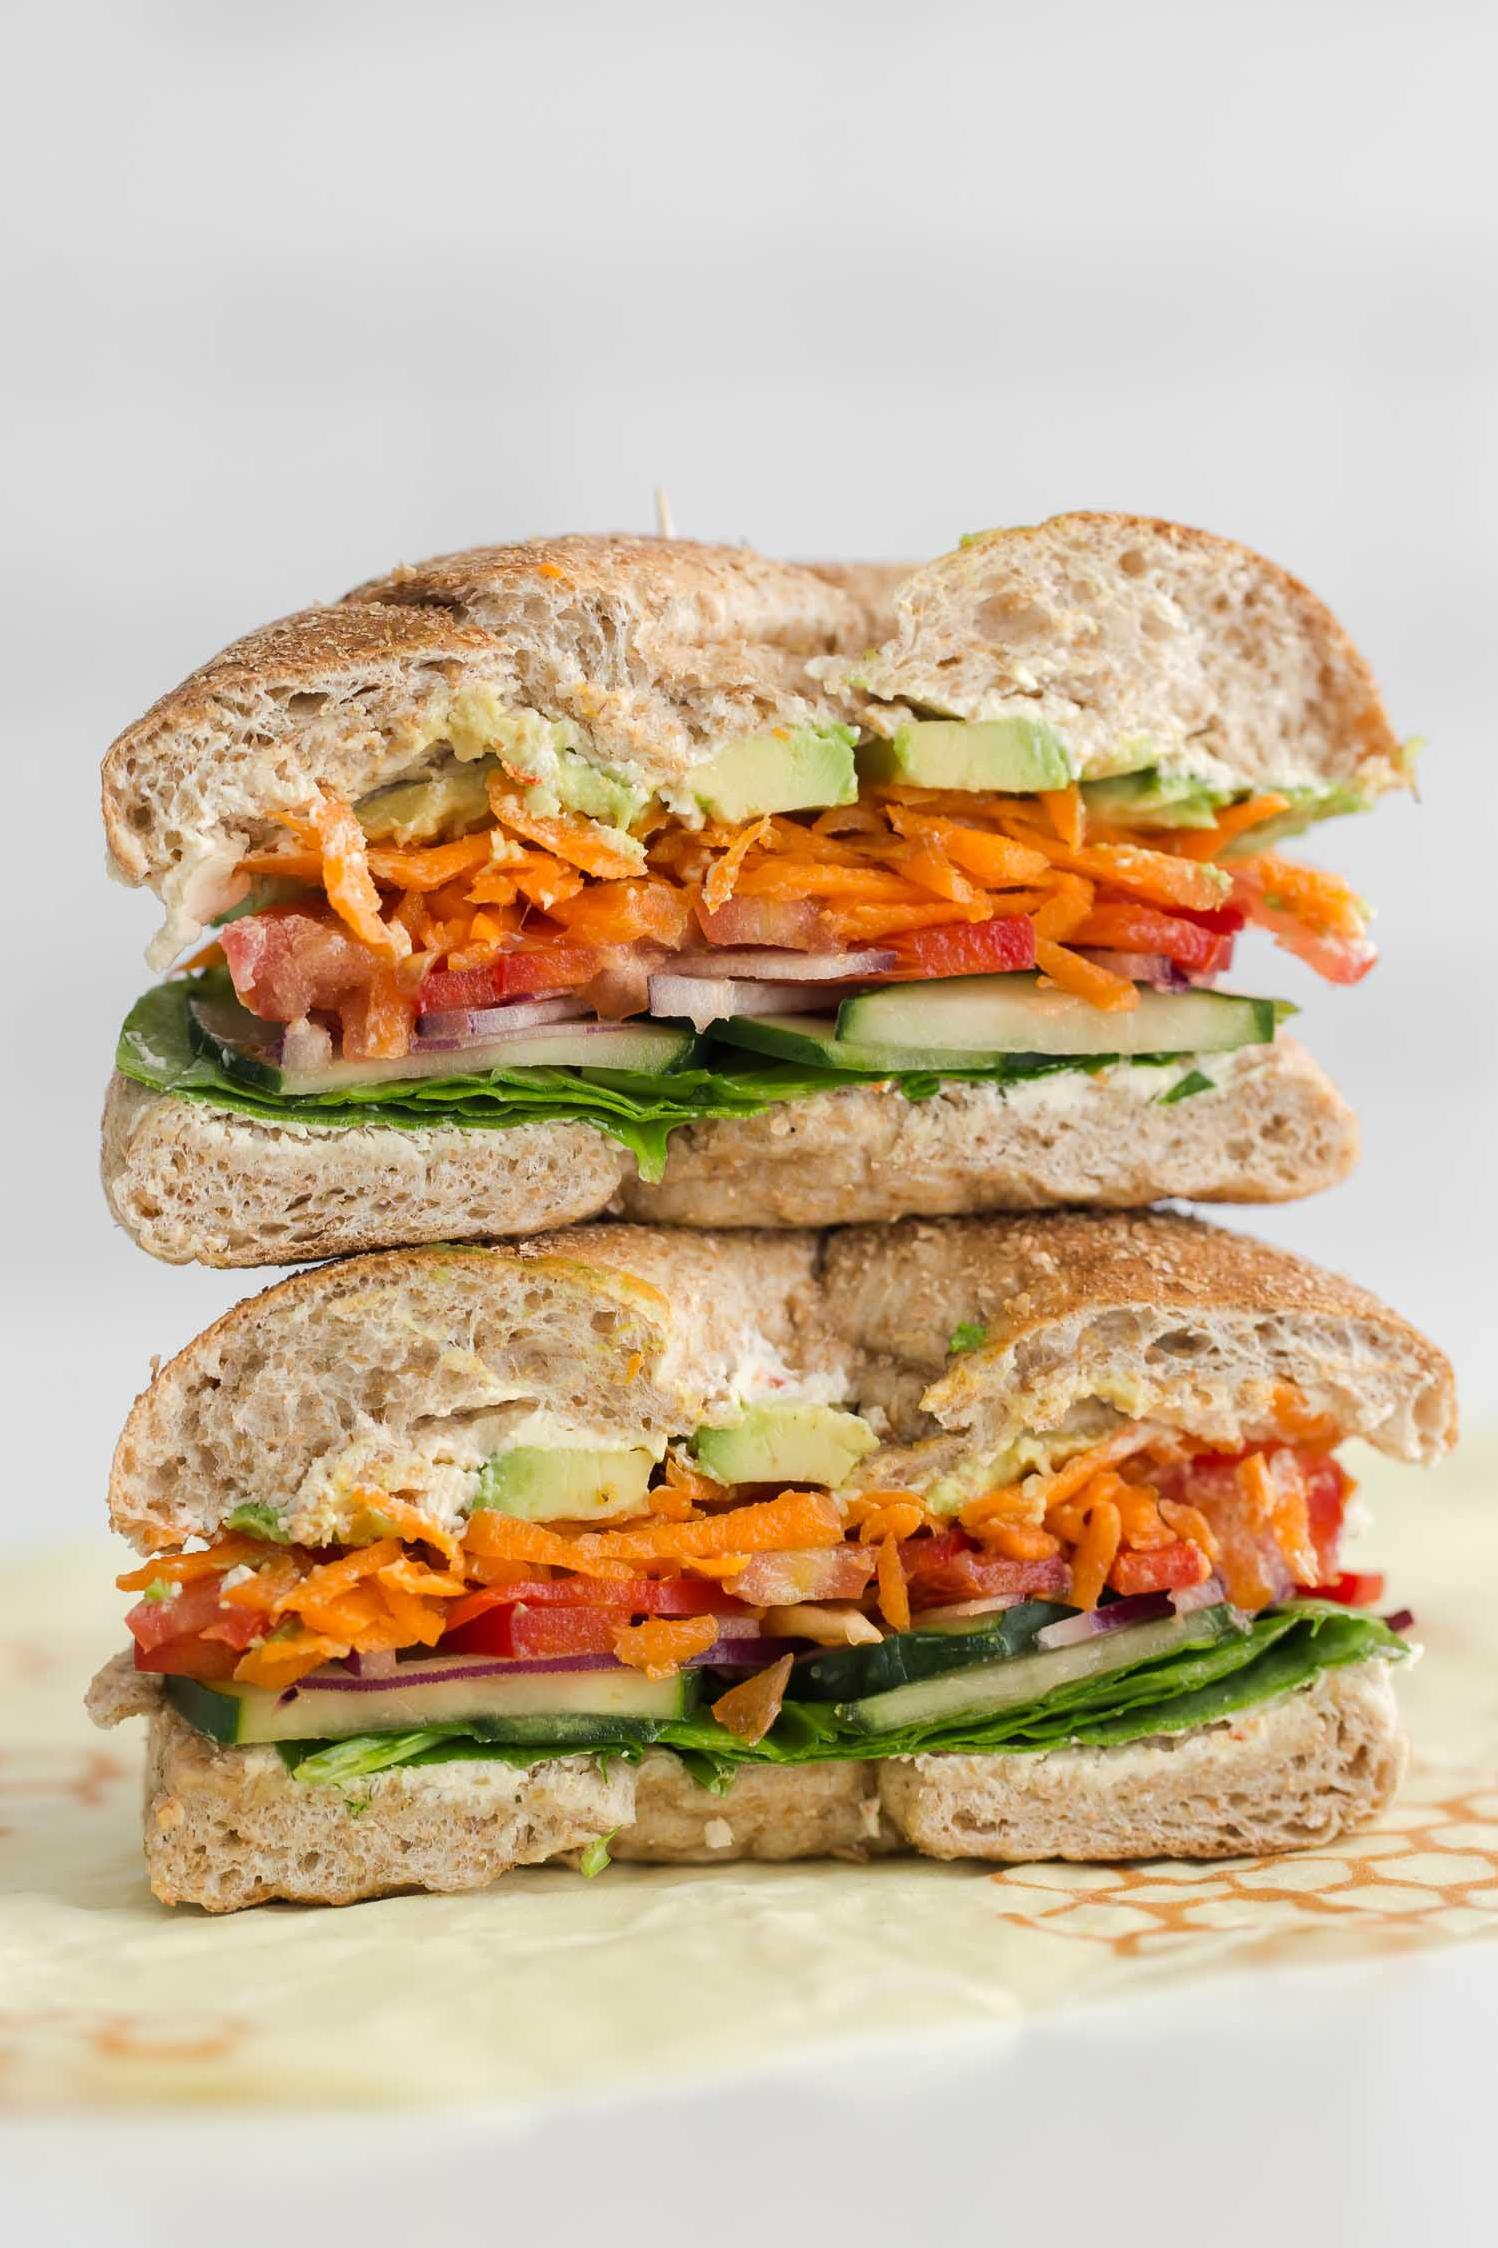  Make your morning a little brighter with this colorful veggie bagel sandwich.